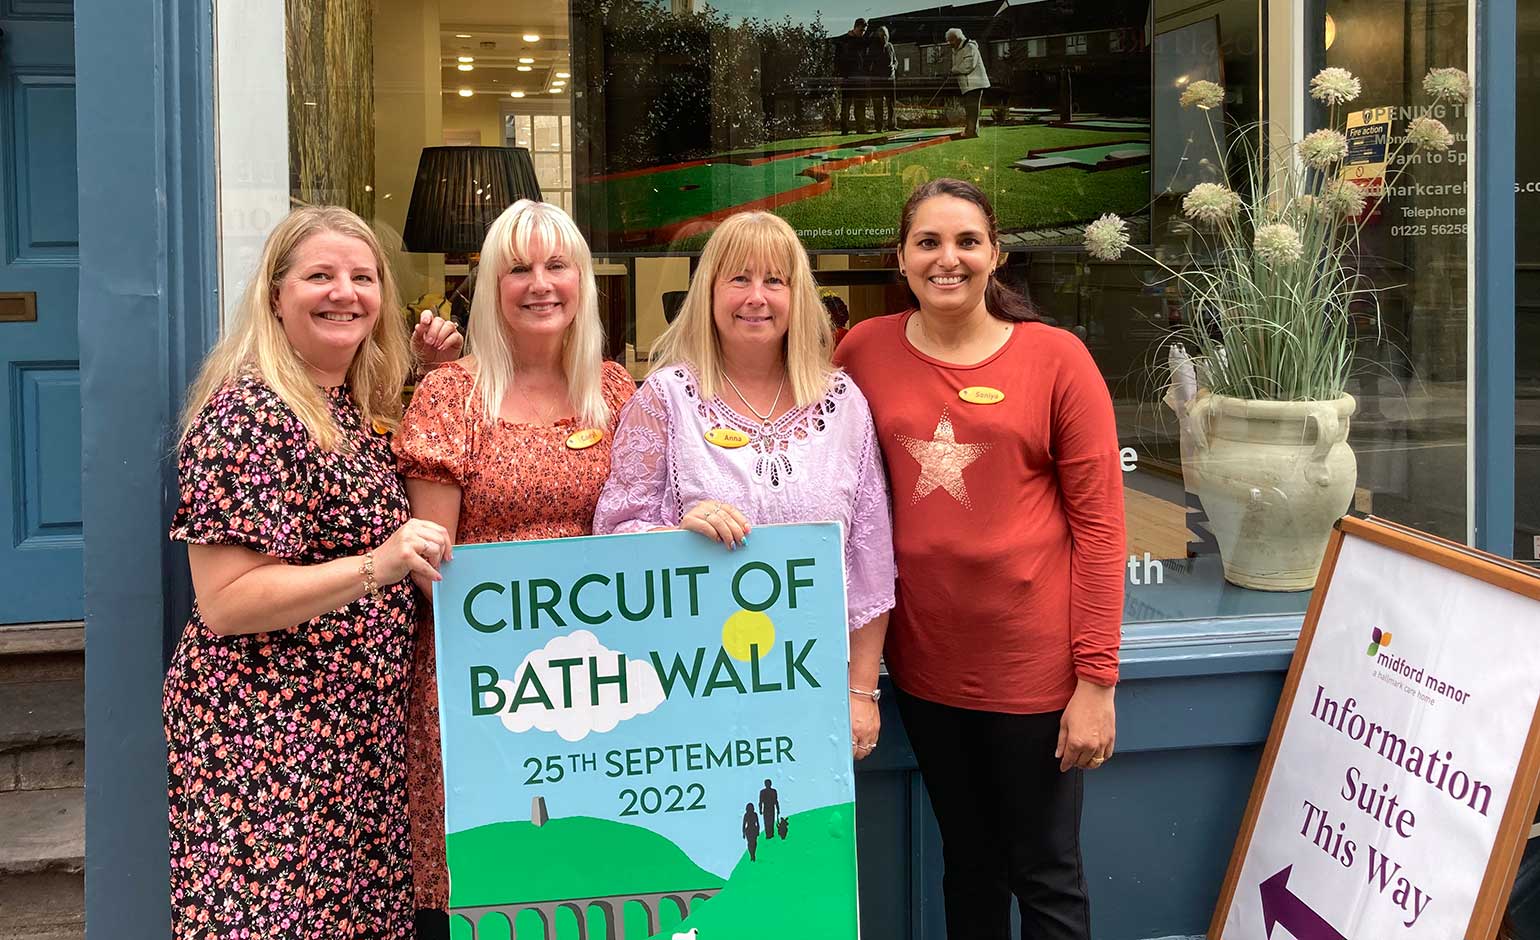 Care home staff set to take on next month’s Circuit of Bath Walk